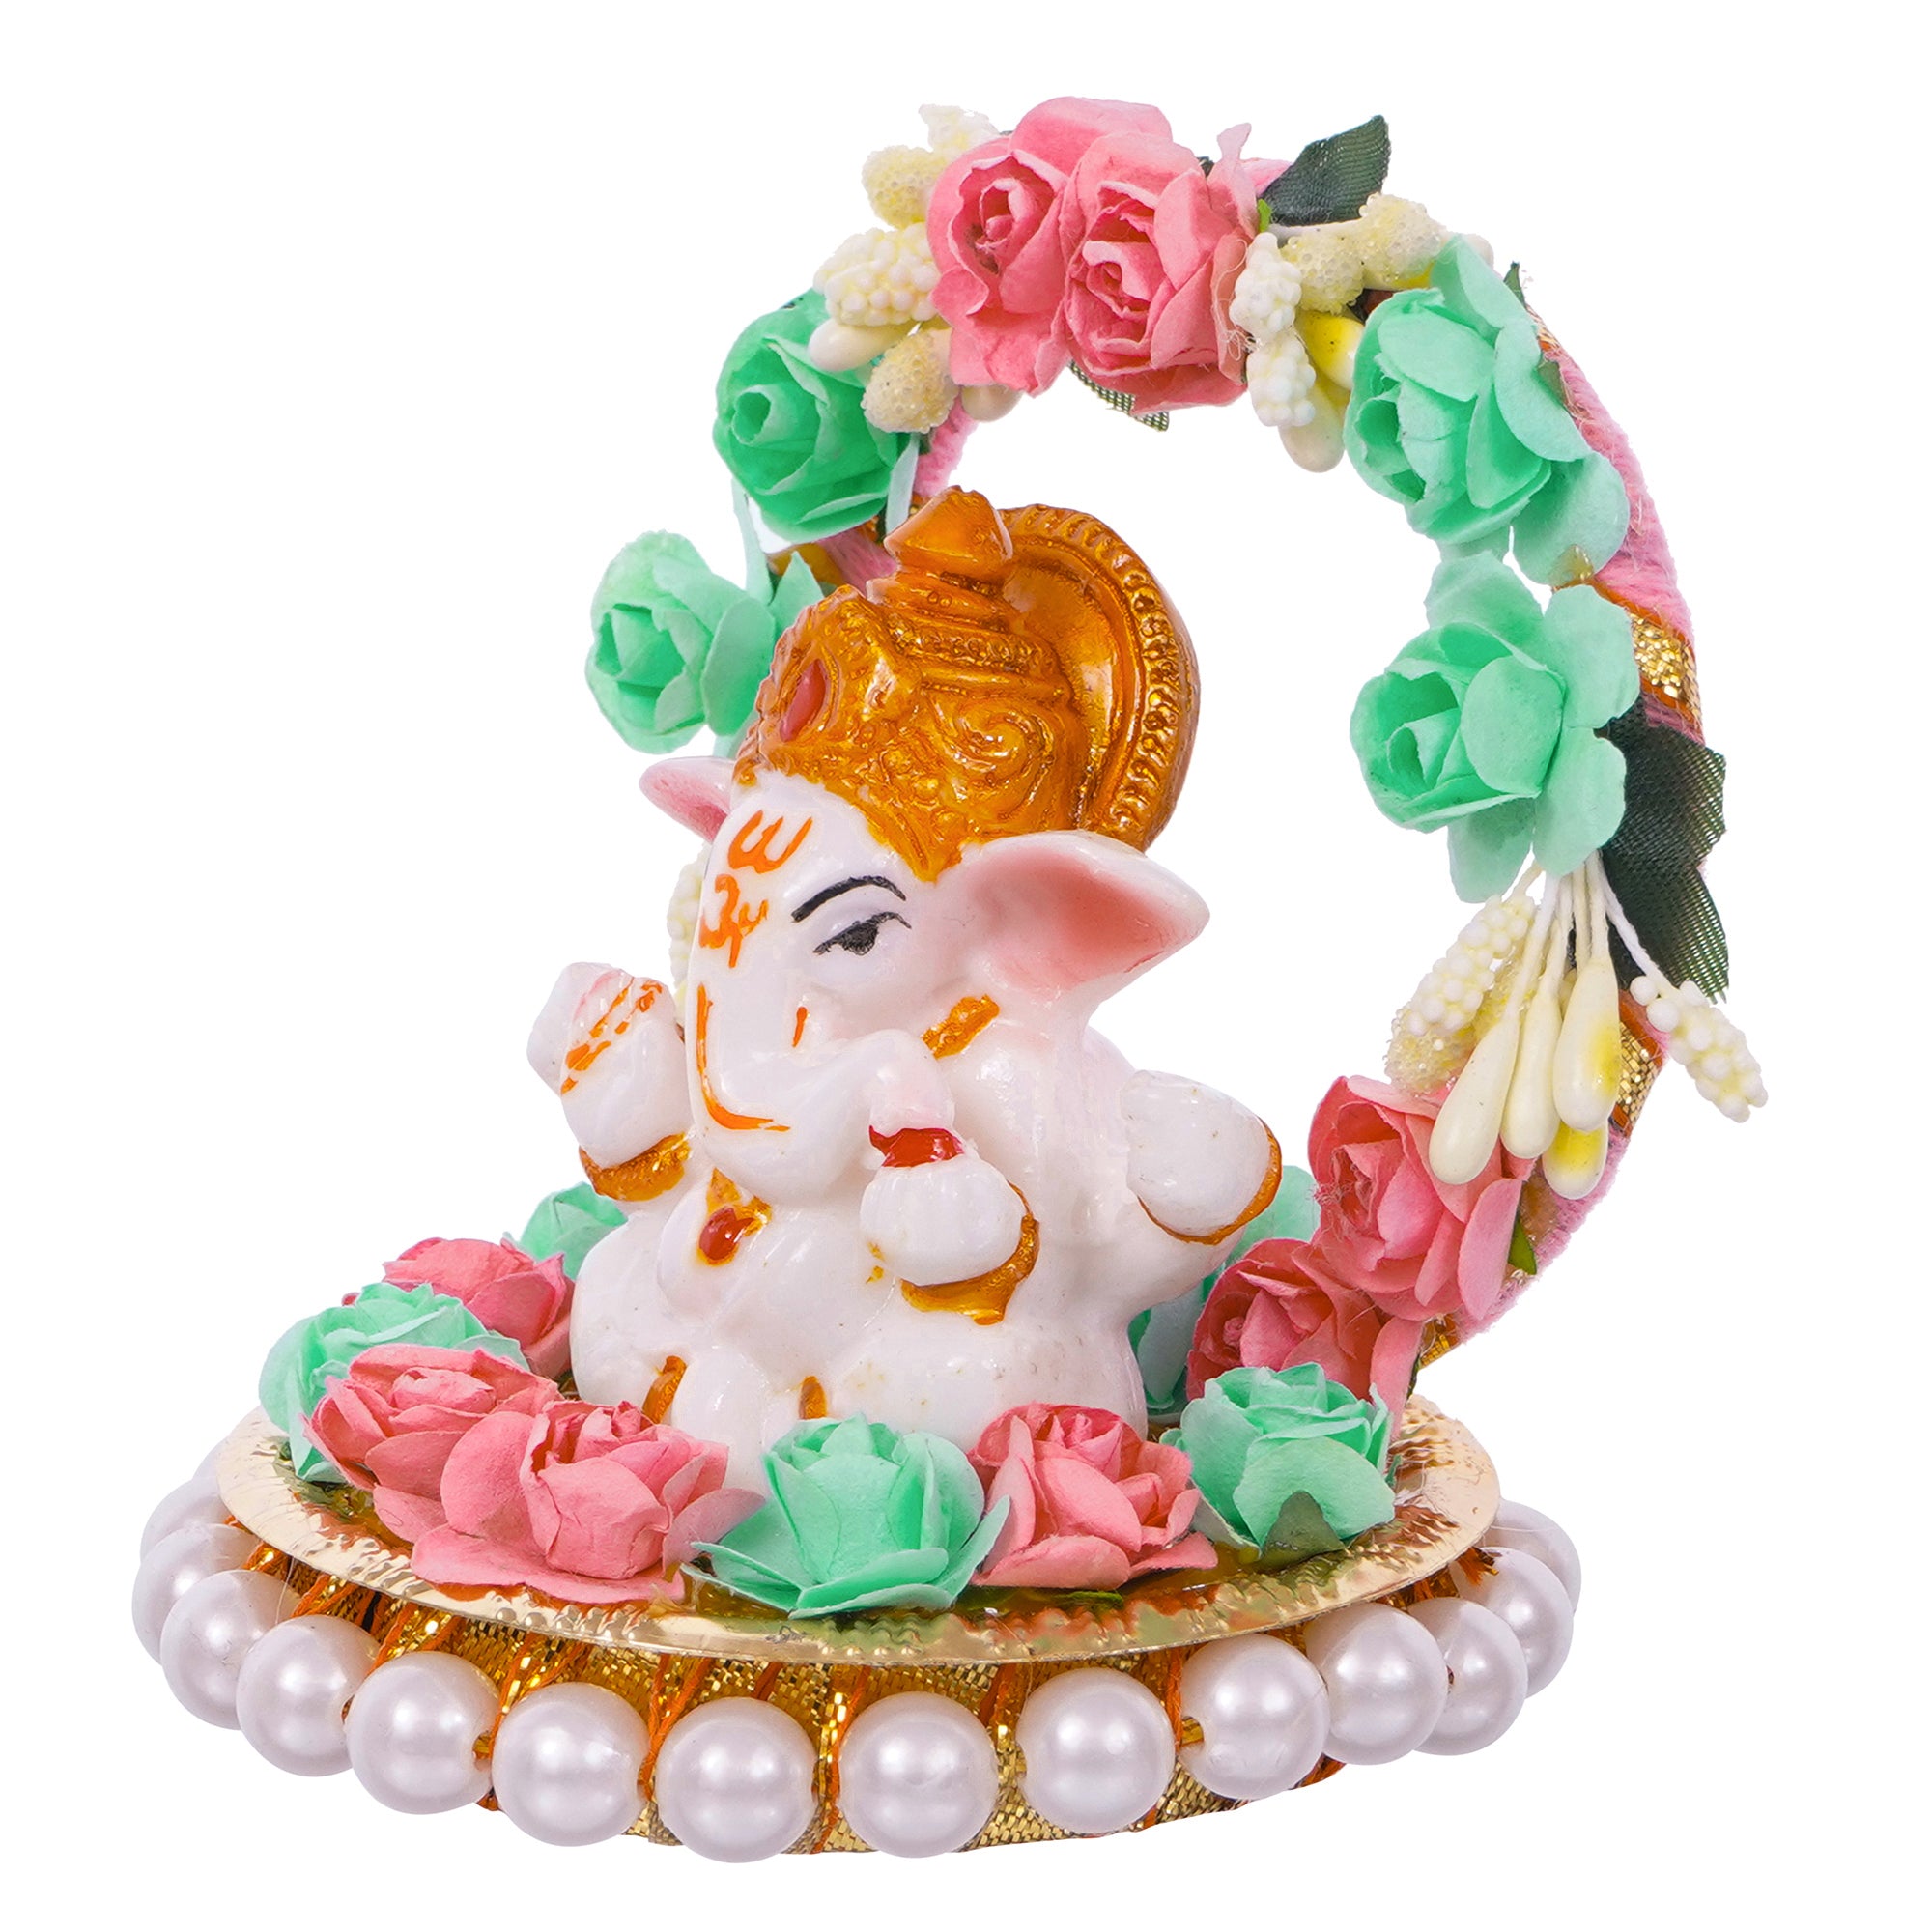 Lord Ganesha Idol On Decorative Handicrafted Plate With Throne Of Pink And Green Flowers 5